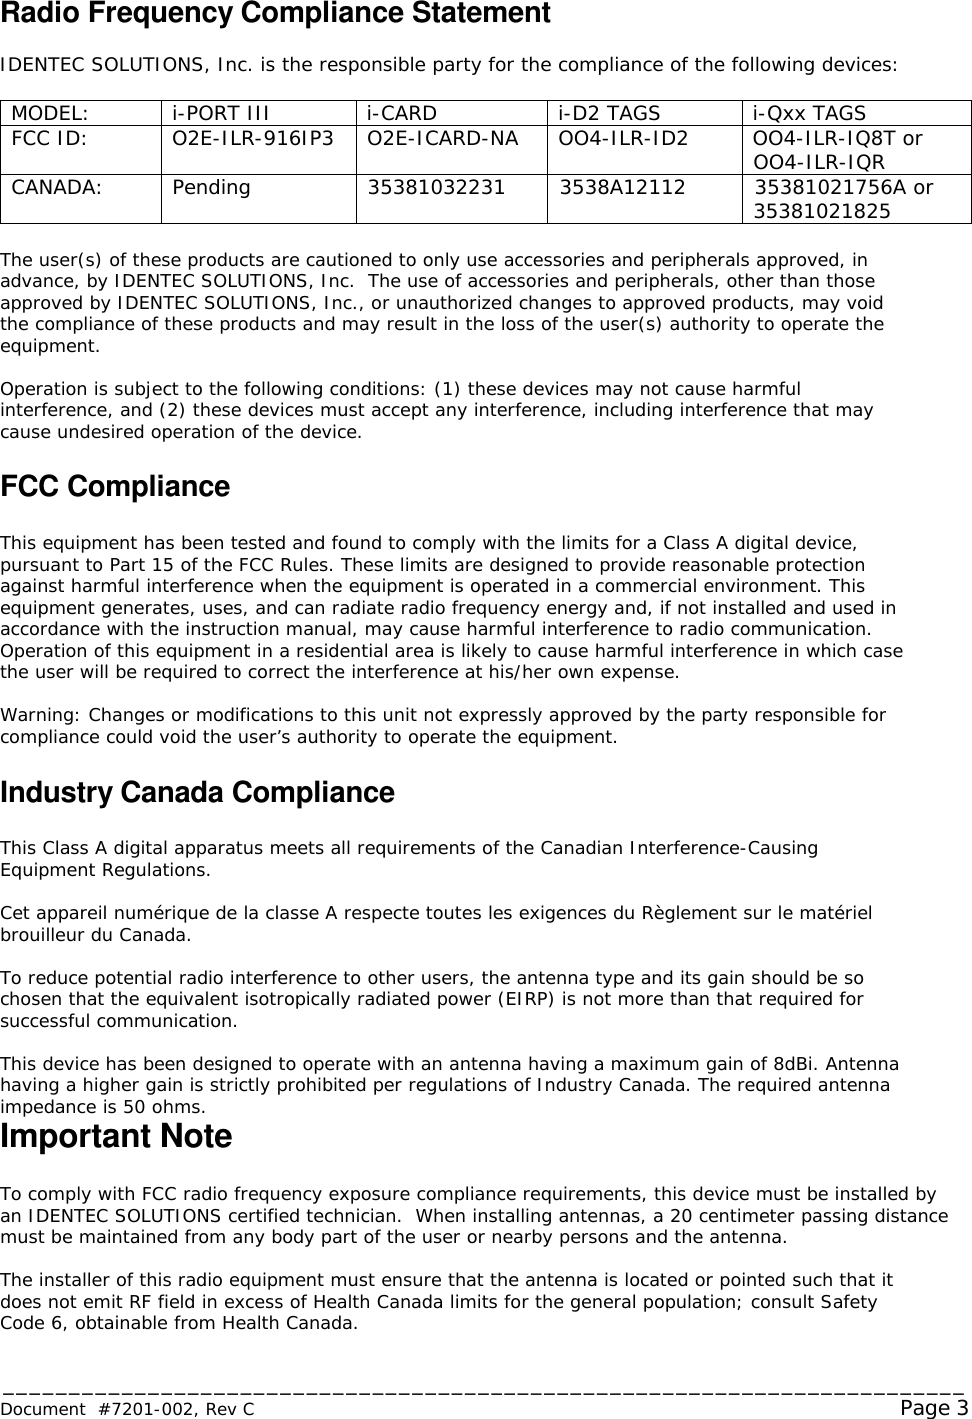 _________________________________________________________________________ Document  #7201-002, Rev C  Page 3 Radio Frequency Compliance Statement  IDENTEC SOLUTIONS, Inc. is the responsible party for the compliance of the following devices:  MODEL: i-PORT III i-CARD i-D2 TAGS i-Qxx TAGS FCC ID: O2E-ILR-916IP3 O2E-ICARD-NA OO4-ILR-ID2 OO4-ILR-IQ8T or OO4-ILR-IQR CANADA: Pending 35381032231 3538A12112 35381021756A or  35381021825  The user(s) of these products are cautioned to only use accessories and peripherals approved, in advance, by IDENTEC SOLUTIONS, Inc.  The use of accessories and peripherals, other than those approved by IDENTEC SOLUTIONS, Inc., or unauthorized changes to approved products, may void the compliance of these products and may result in the loss of the user(s) authority to operate the equipment.  Operation is subject to the following conditions: (1) these devices may not cause harmful interference, and (2) these devices must accept any interference, including interference that may cause undesired operation of the device.  FCC Compliance  This equipment has been tested and found to comply with the limits for a Class A digital device, pursuant to Part 15 of the FCC Rules. These limits are designed to provide reasonable protection against harmful interference when the equipment is operated in a commercial environment. This equipment generates, uses, and can radiate radio frequency energy and, if not installed and used in accordance with the instruction manual, may cause harmful interference to radio communication. Operation of this equipment in a residential area is likely to cause harmful interference in which case the user will be required to correct the interference at his/her own expense.  Warning: Changes or modifications to this unit not expressly approved by the party responsible for compliance could void the user’s authority to operate the equipment.  Industry Canada Compliance  This Class A digital apparatus meets all requirements of the Canadian Interference-Causing Equipment Regulations.  Cet appareil numérique de la classe A respecte toutes les exigences du Règlement sur le matériel brouilleur du Canada.  To reduce potential radio interference to other users, the antenna type and its gain should be so chosen that the equivalent isotropically radiated power (EIRP) is not more than that required for successful communication.  This device has been designed to operate with an antenna having a maximum gain of 8dBi. Antenna having a higher gain is strictly prohibited per regulations of Industry Canada. The required antenna impedance is 50 ohms. Important Note  To comply with FCC radio frequency exposure compliance requirements, this device must be installed by an IDENTEC SOLUTIONS certified technician.  When installing antennas, a 20 centimeter passing distance must be maintained from any body part of the user or nearby persons and the antenna.   The installer of this radio equipment must ensure that the antenna is located or pointed such that it does not emit RF field in excess of Health Canada limits for the general population; consult Safety Code 6, obtainable from Health Canada. 